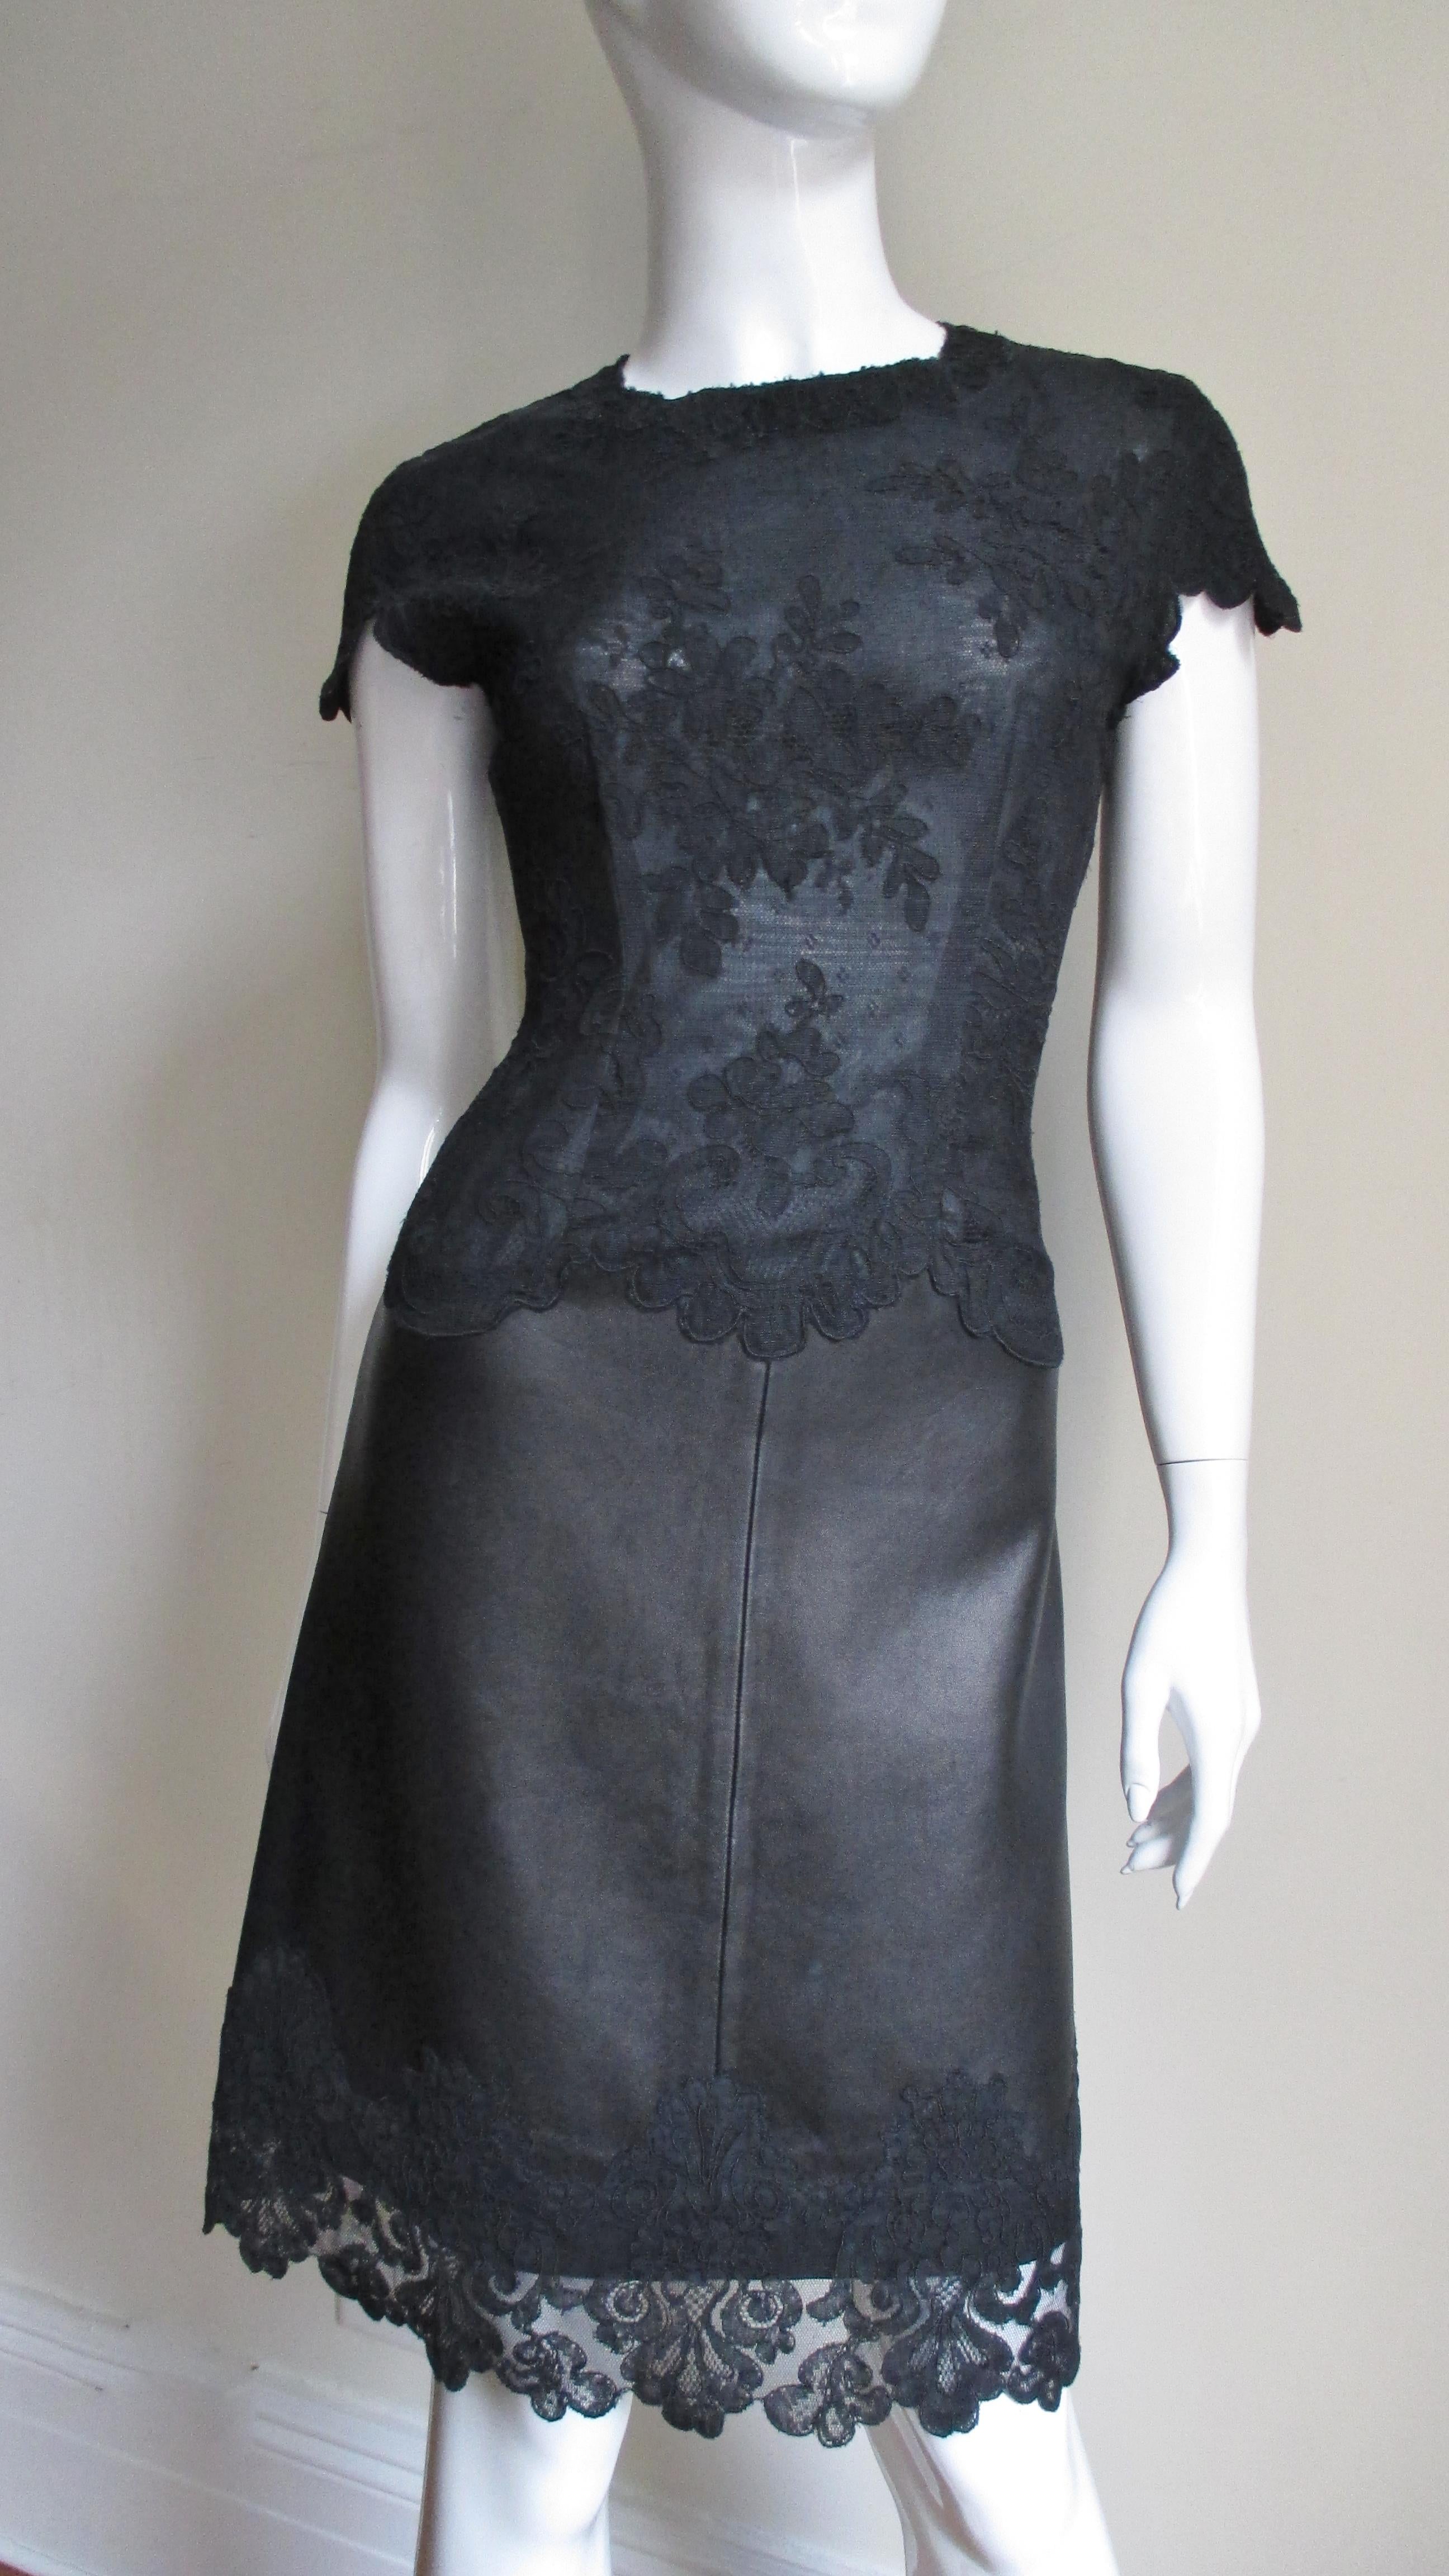 Gianni Versace Leather and Lace Dress In Excellent Condition For Sale In Water Mill, NY